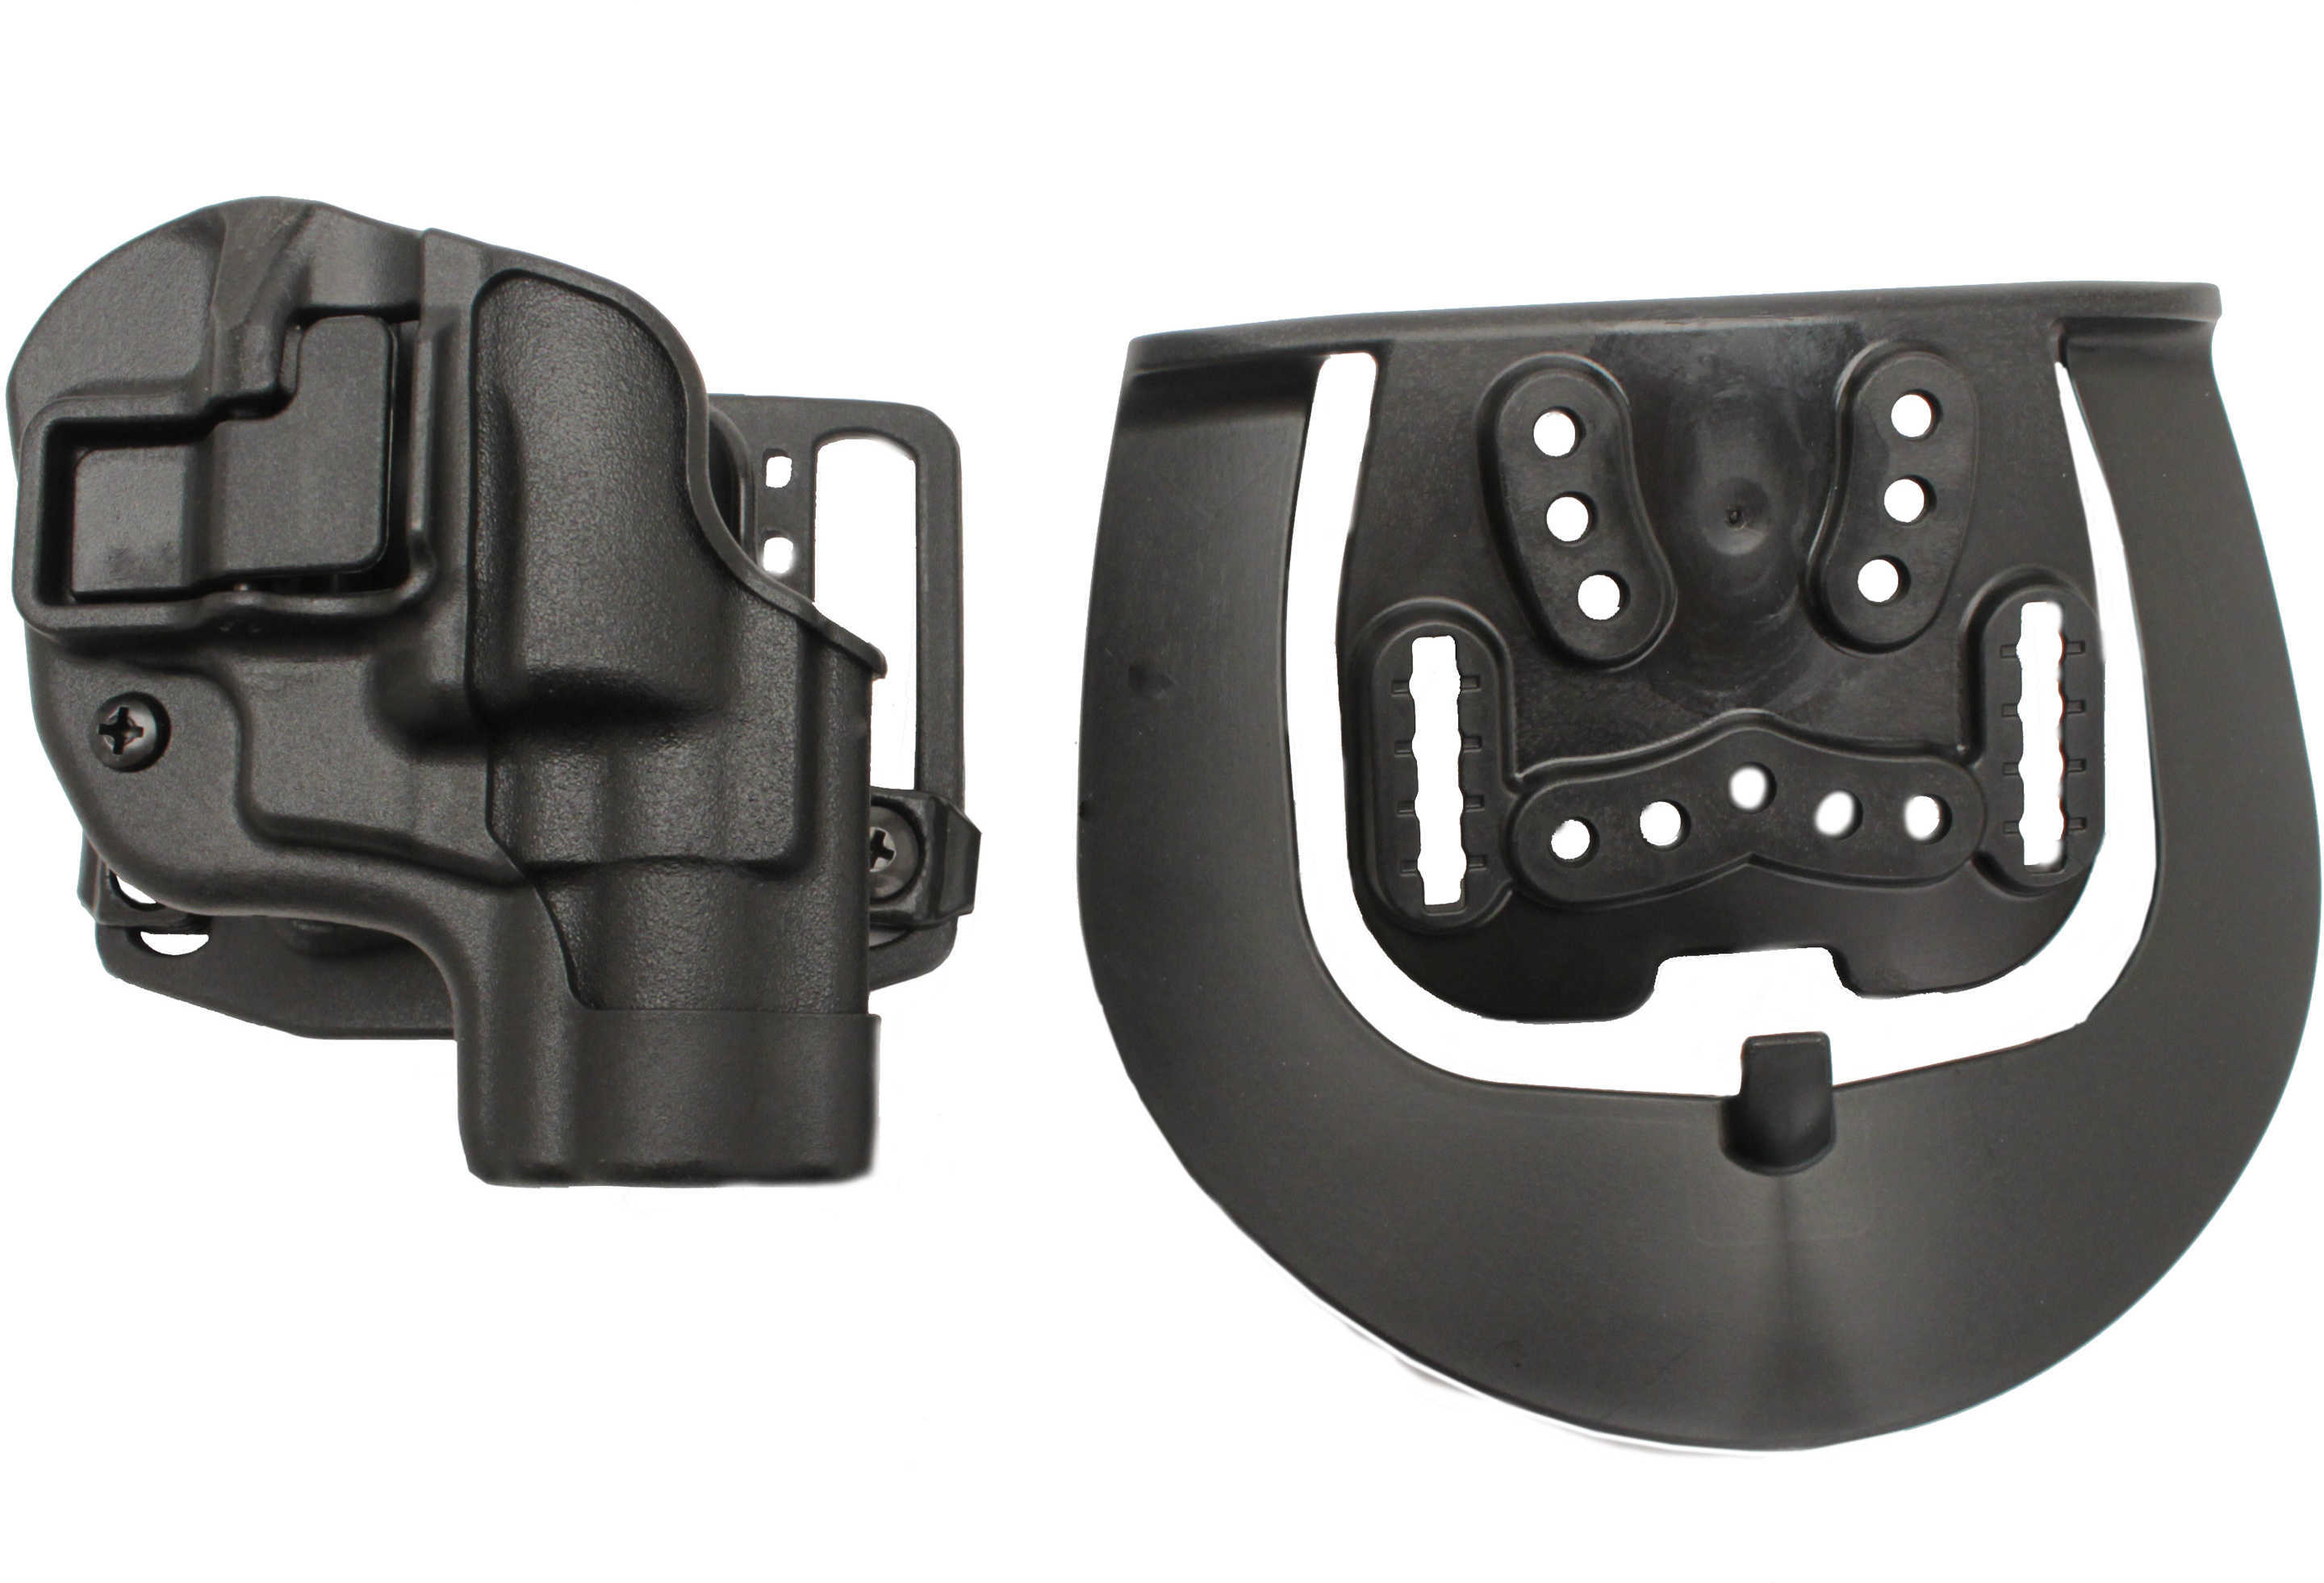 Blackhawk Serpa CQC Matte Holster With Active Retention System - Right Handed Size 20: S&W J-Frame 2" (Not .